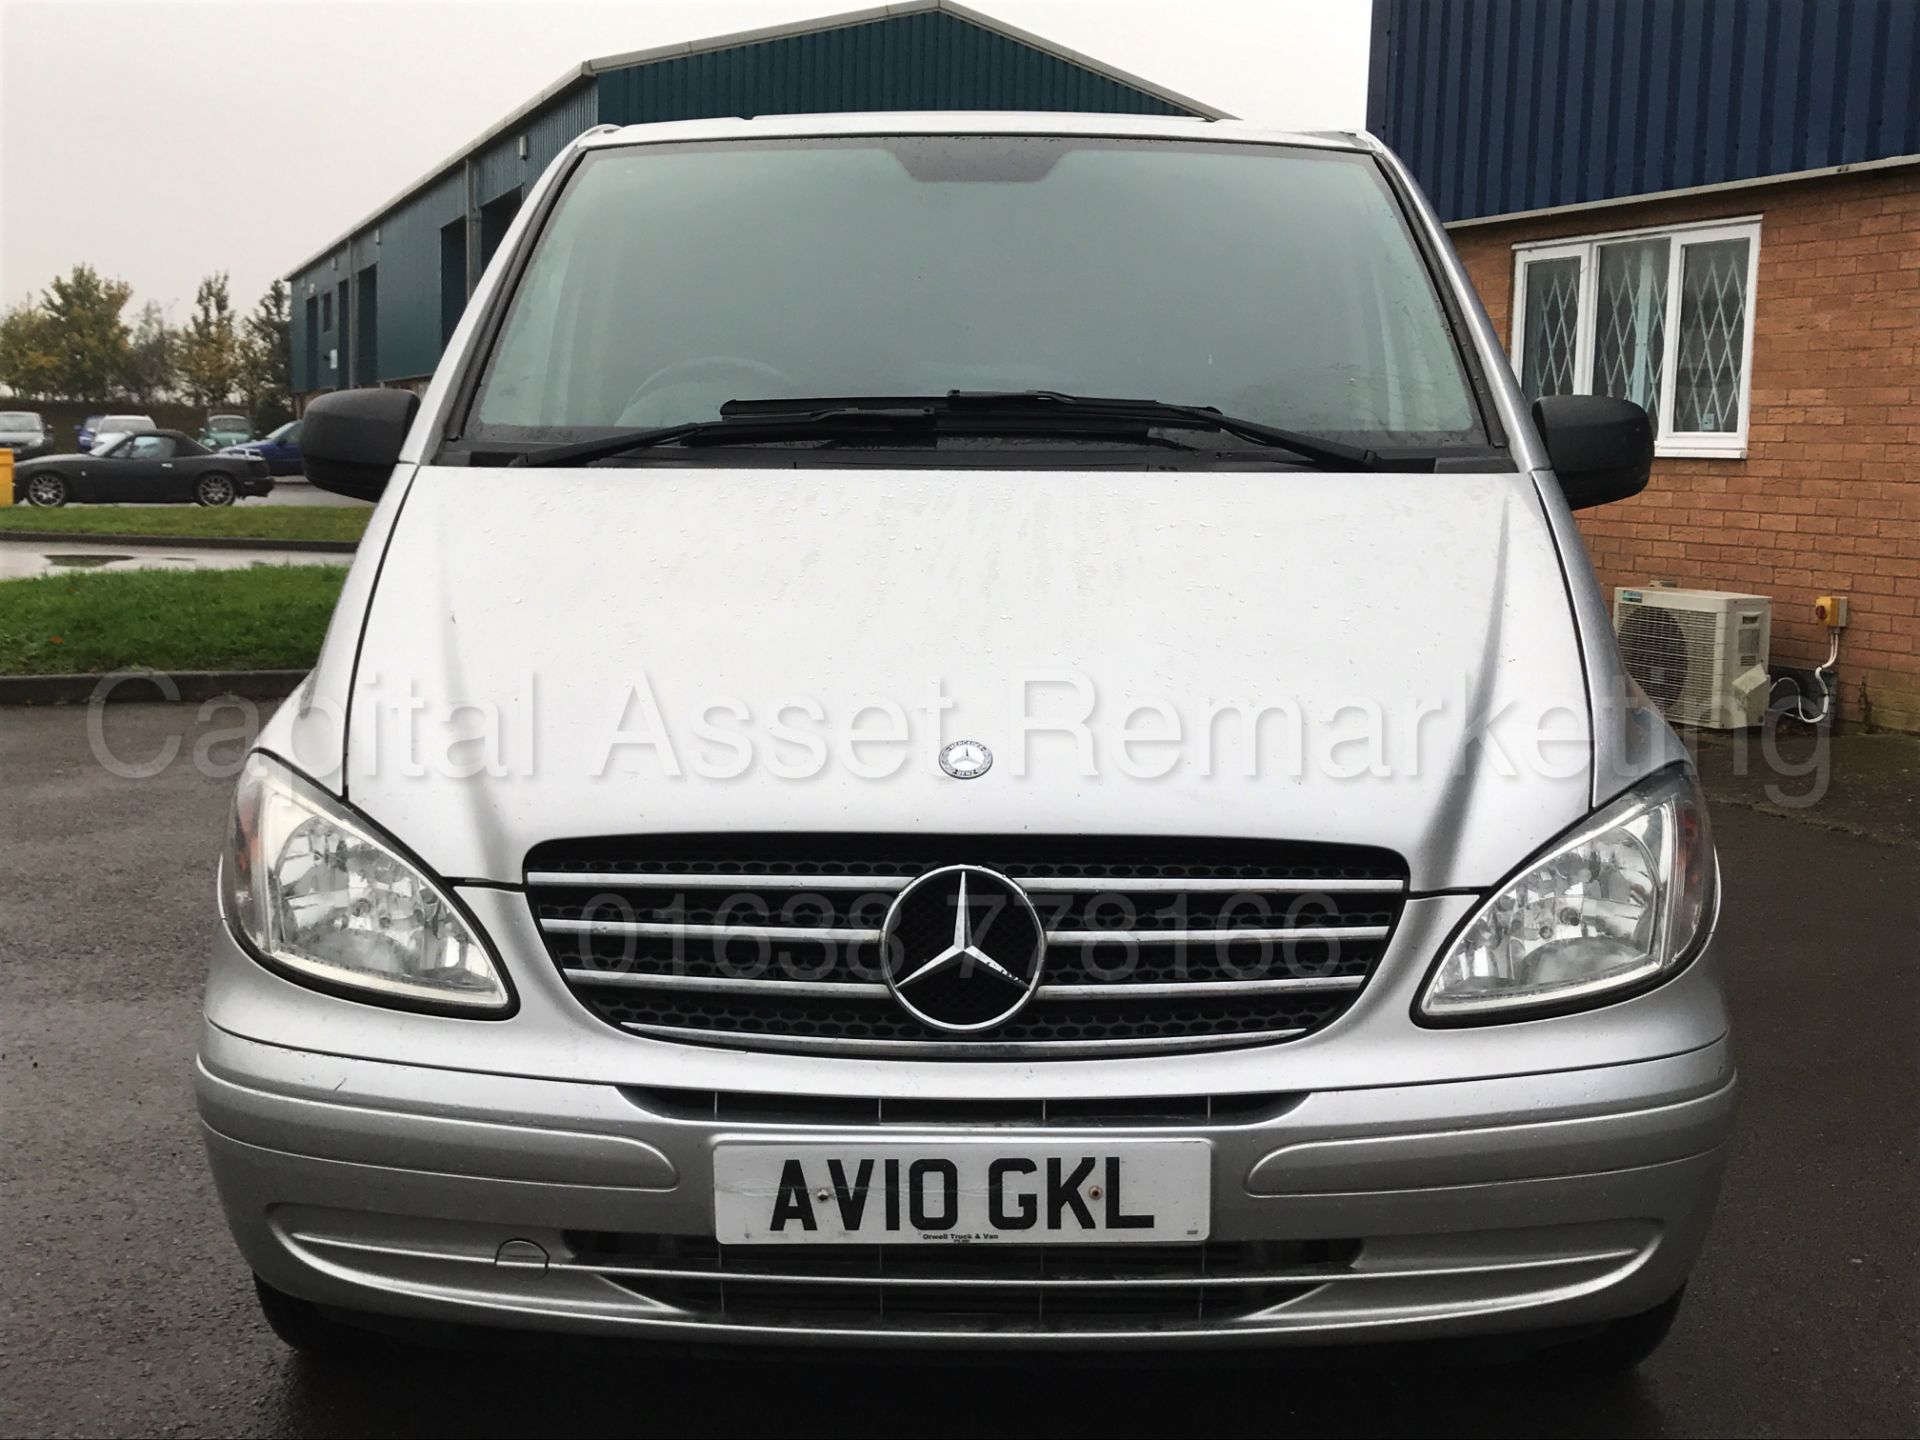 MERCEDES VITO *SPORT* '5 SEATER DUELINER' (2010 - 10 REG) '2.1 CDI - 150 BHP - 6 SPEED' **AIR CON** - Image 10 of 35